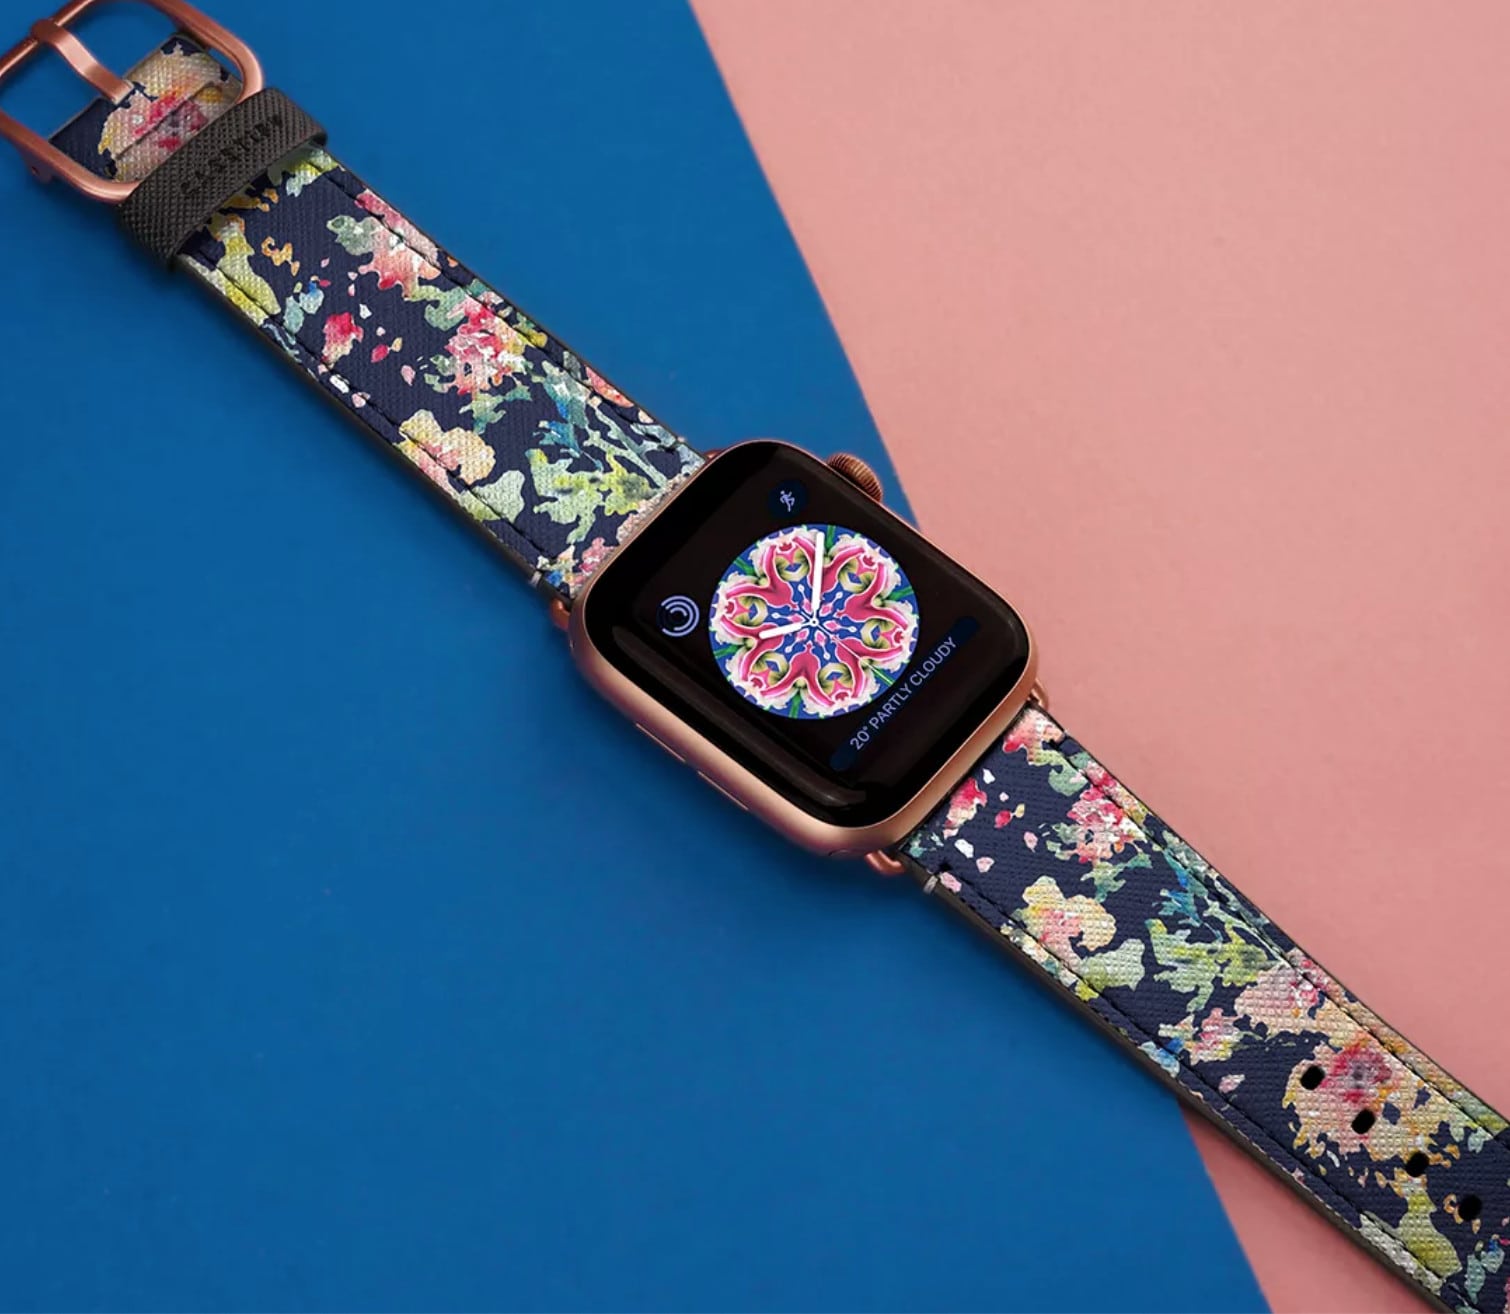 Casetify bands feature custom designs by tons of unique artists. Each band is unique and built to impress all day.